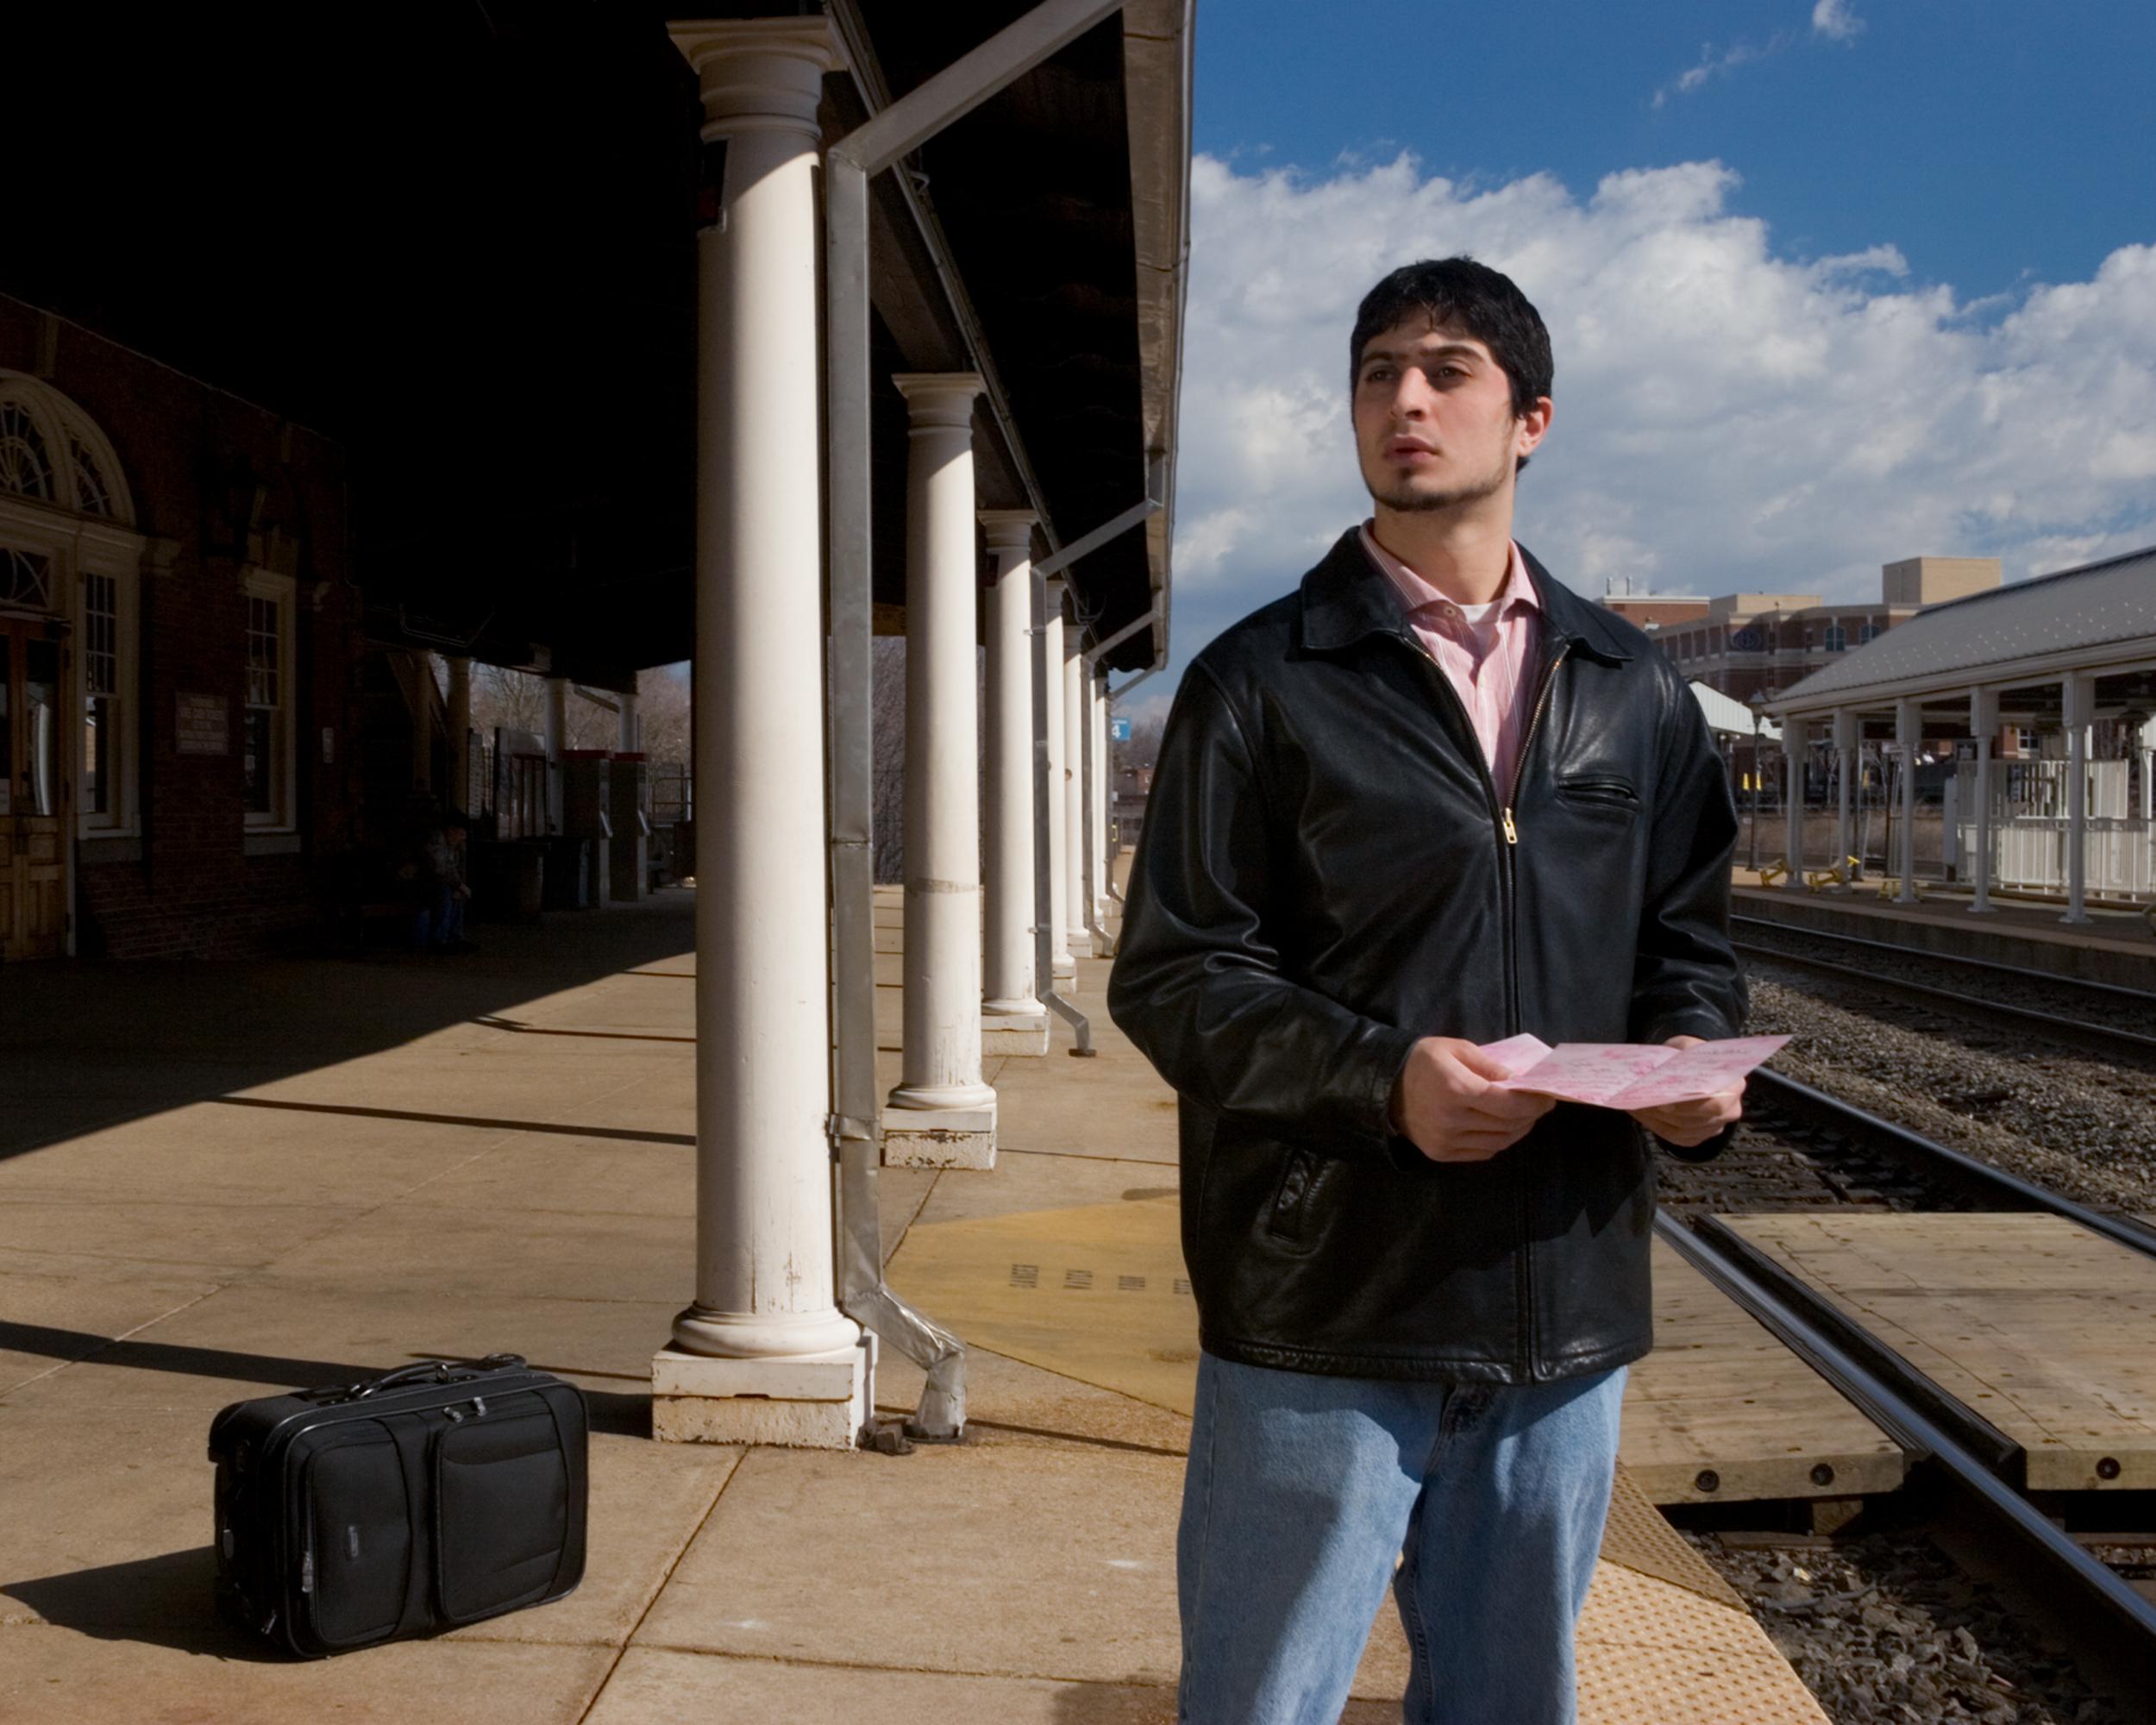 “Easy on the Eyes: Mrs. DeWinter” Portrait of a Beautiful Man at a Train Station - Photograph by Jeanette May